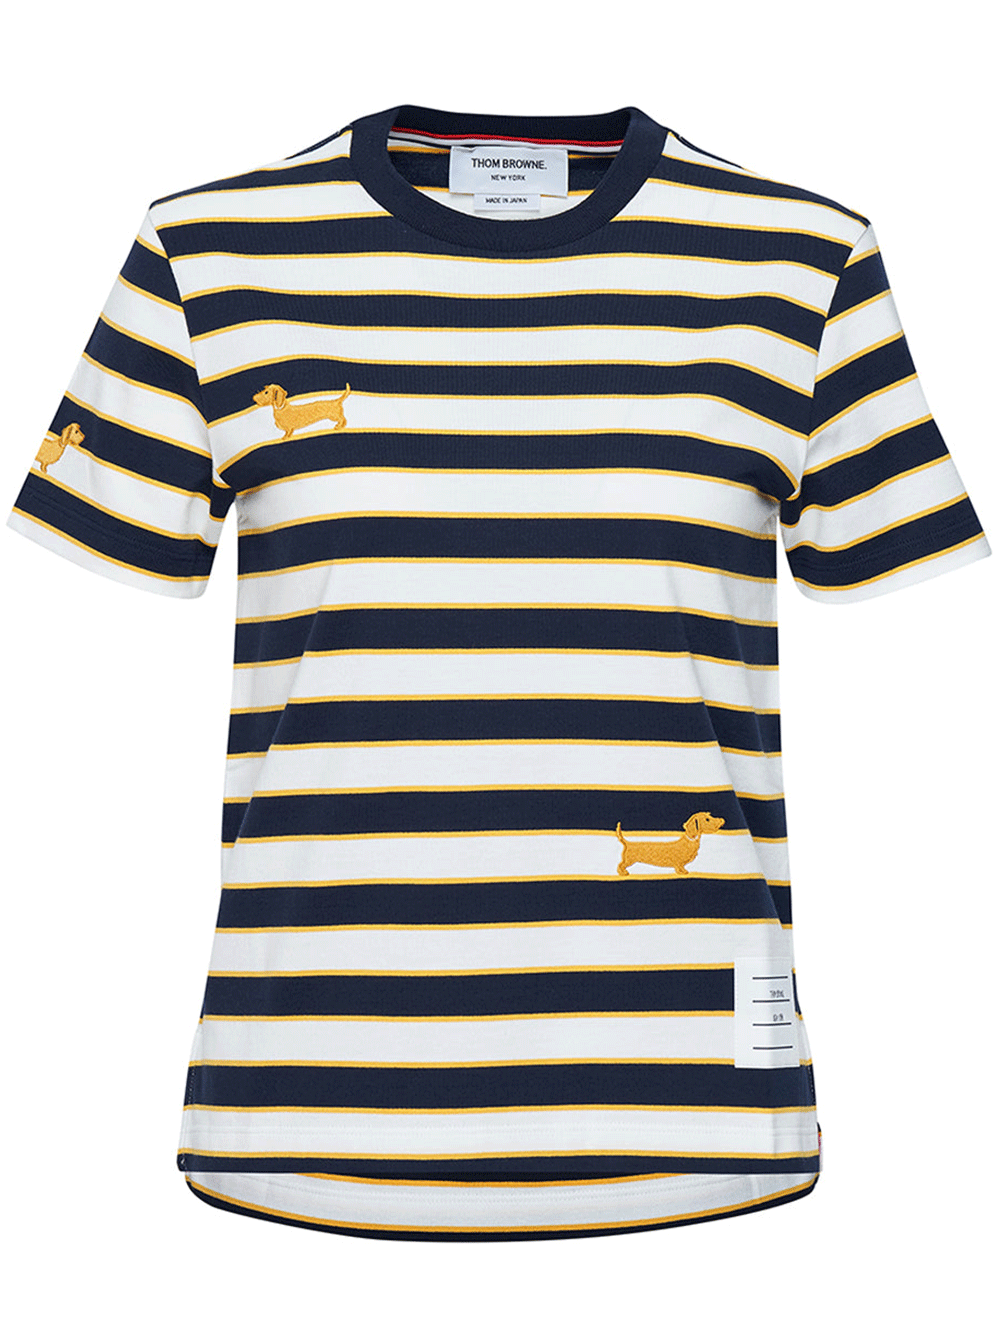 Thom-Browne-Embroidered-Hector-Icons-Rep-Stripe-Tee-Navy-1